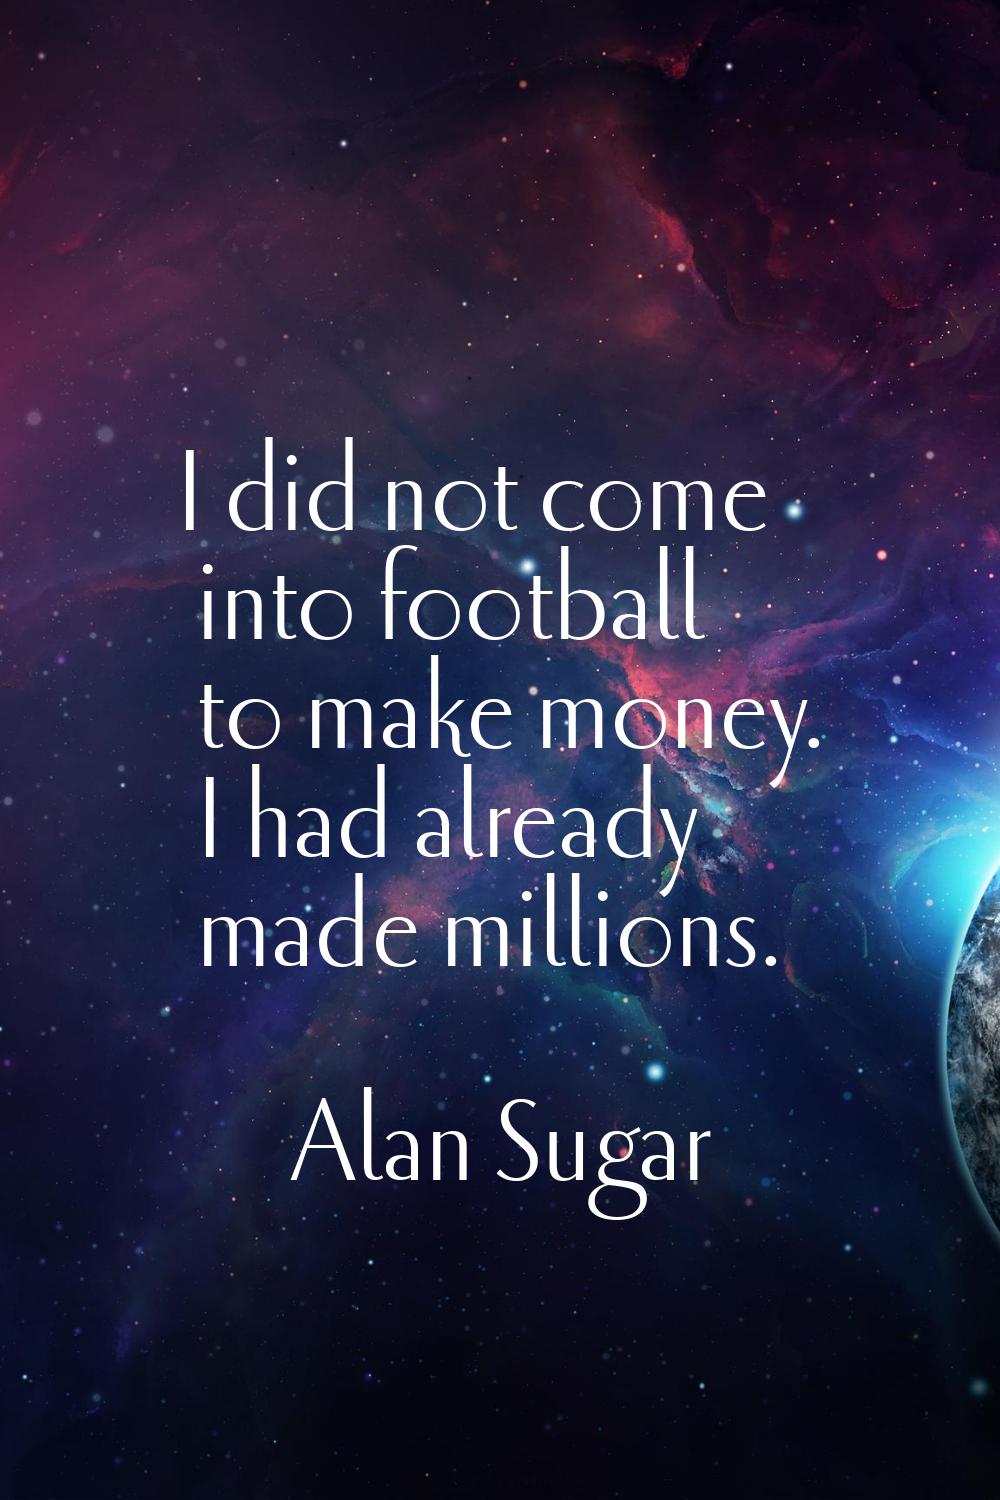 I did not come into football to make money. I had already made millions.